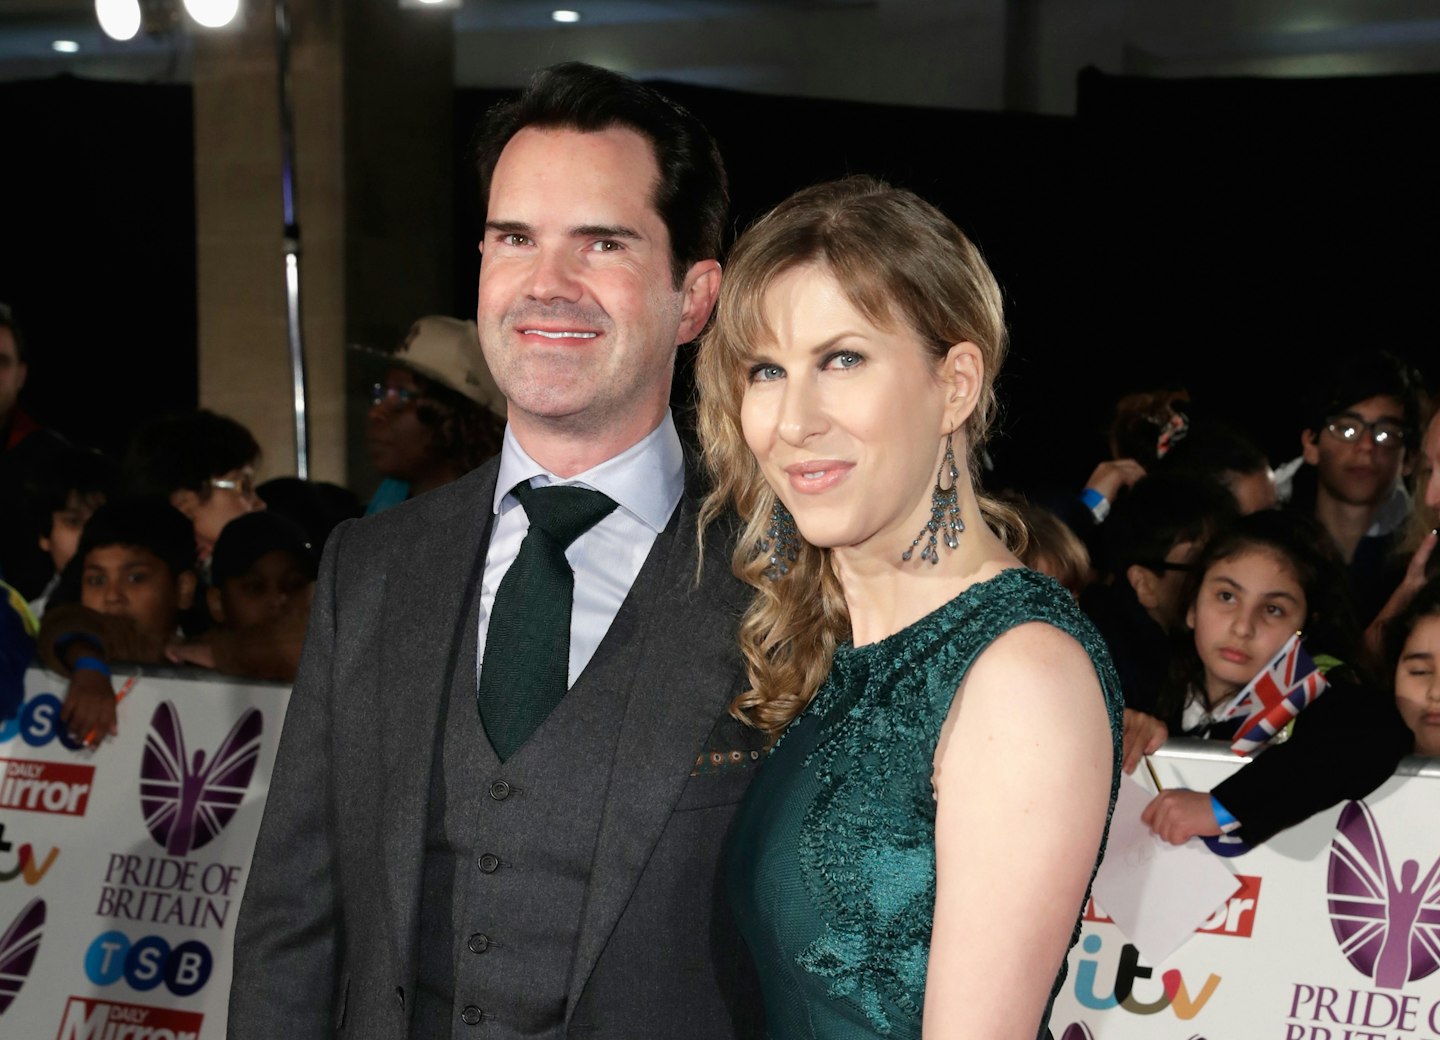 Jimmy Carr and wife